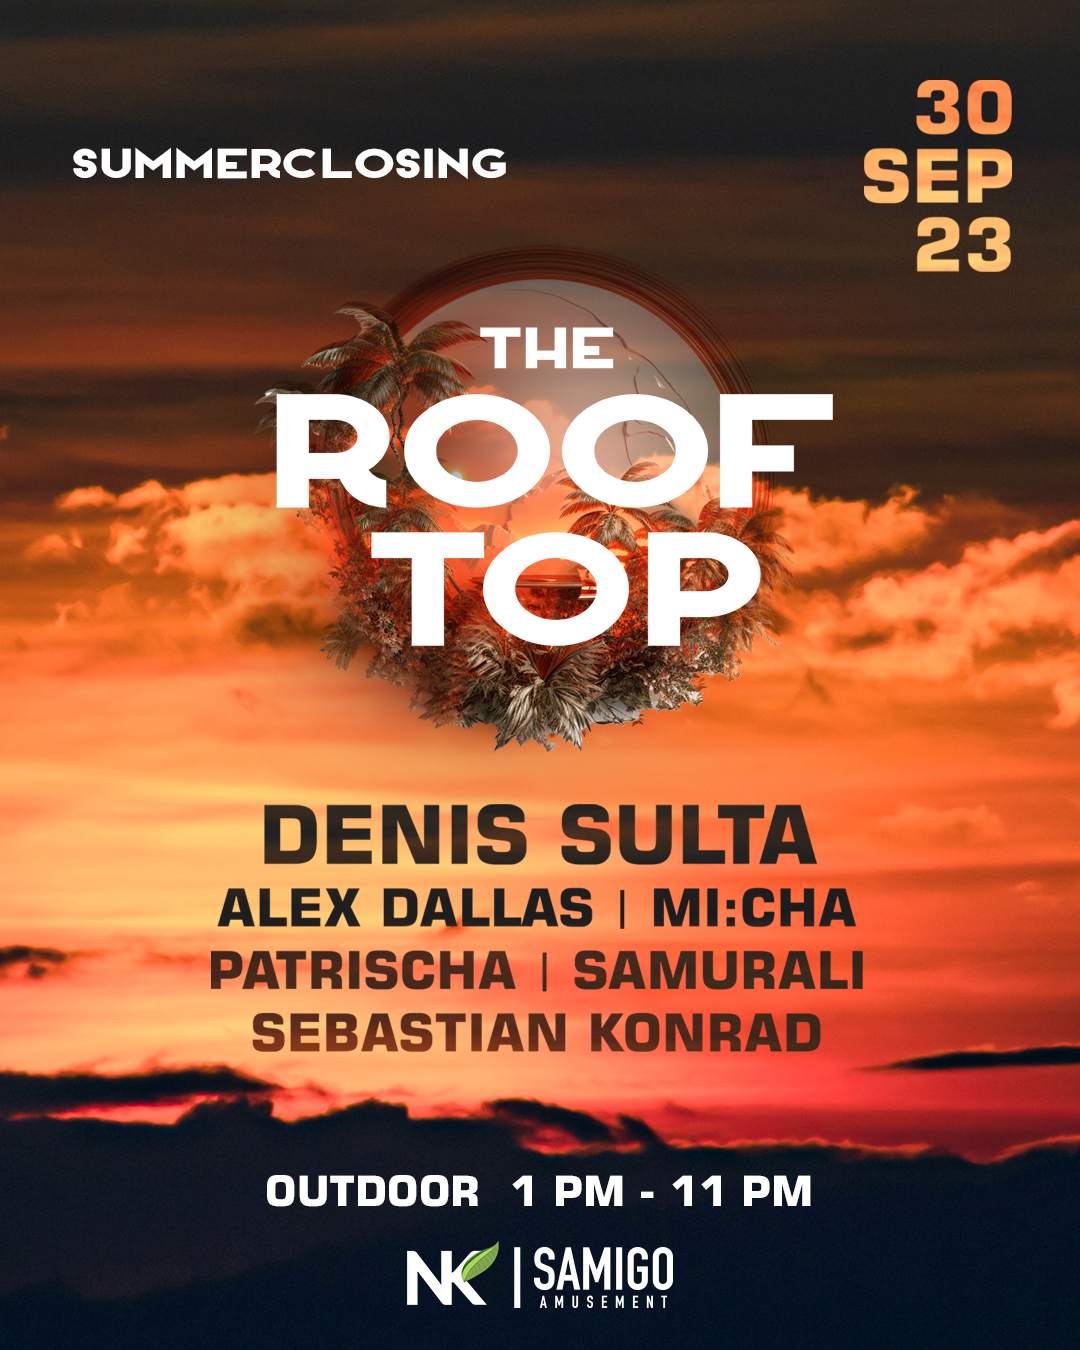 The Rooftop Summerclosing with Denis Sulta - Página frontal